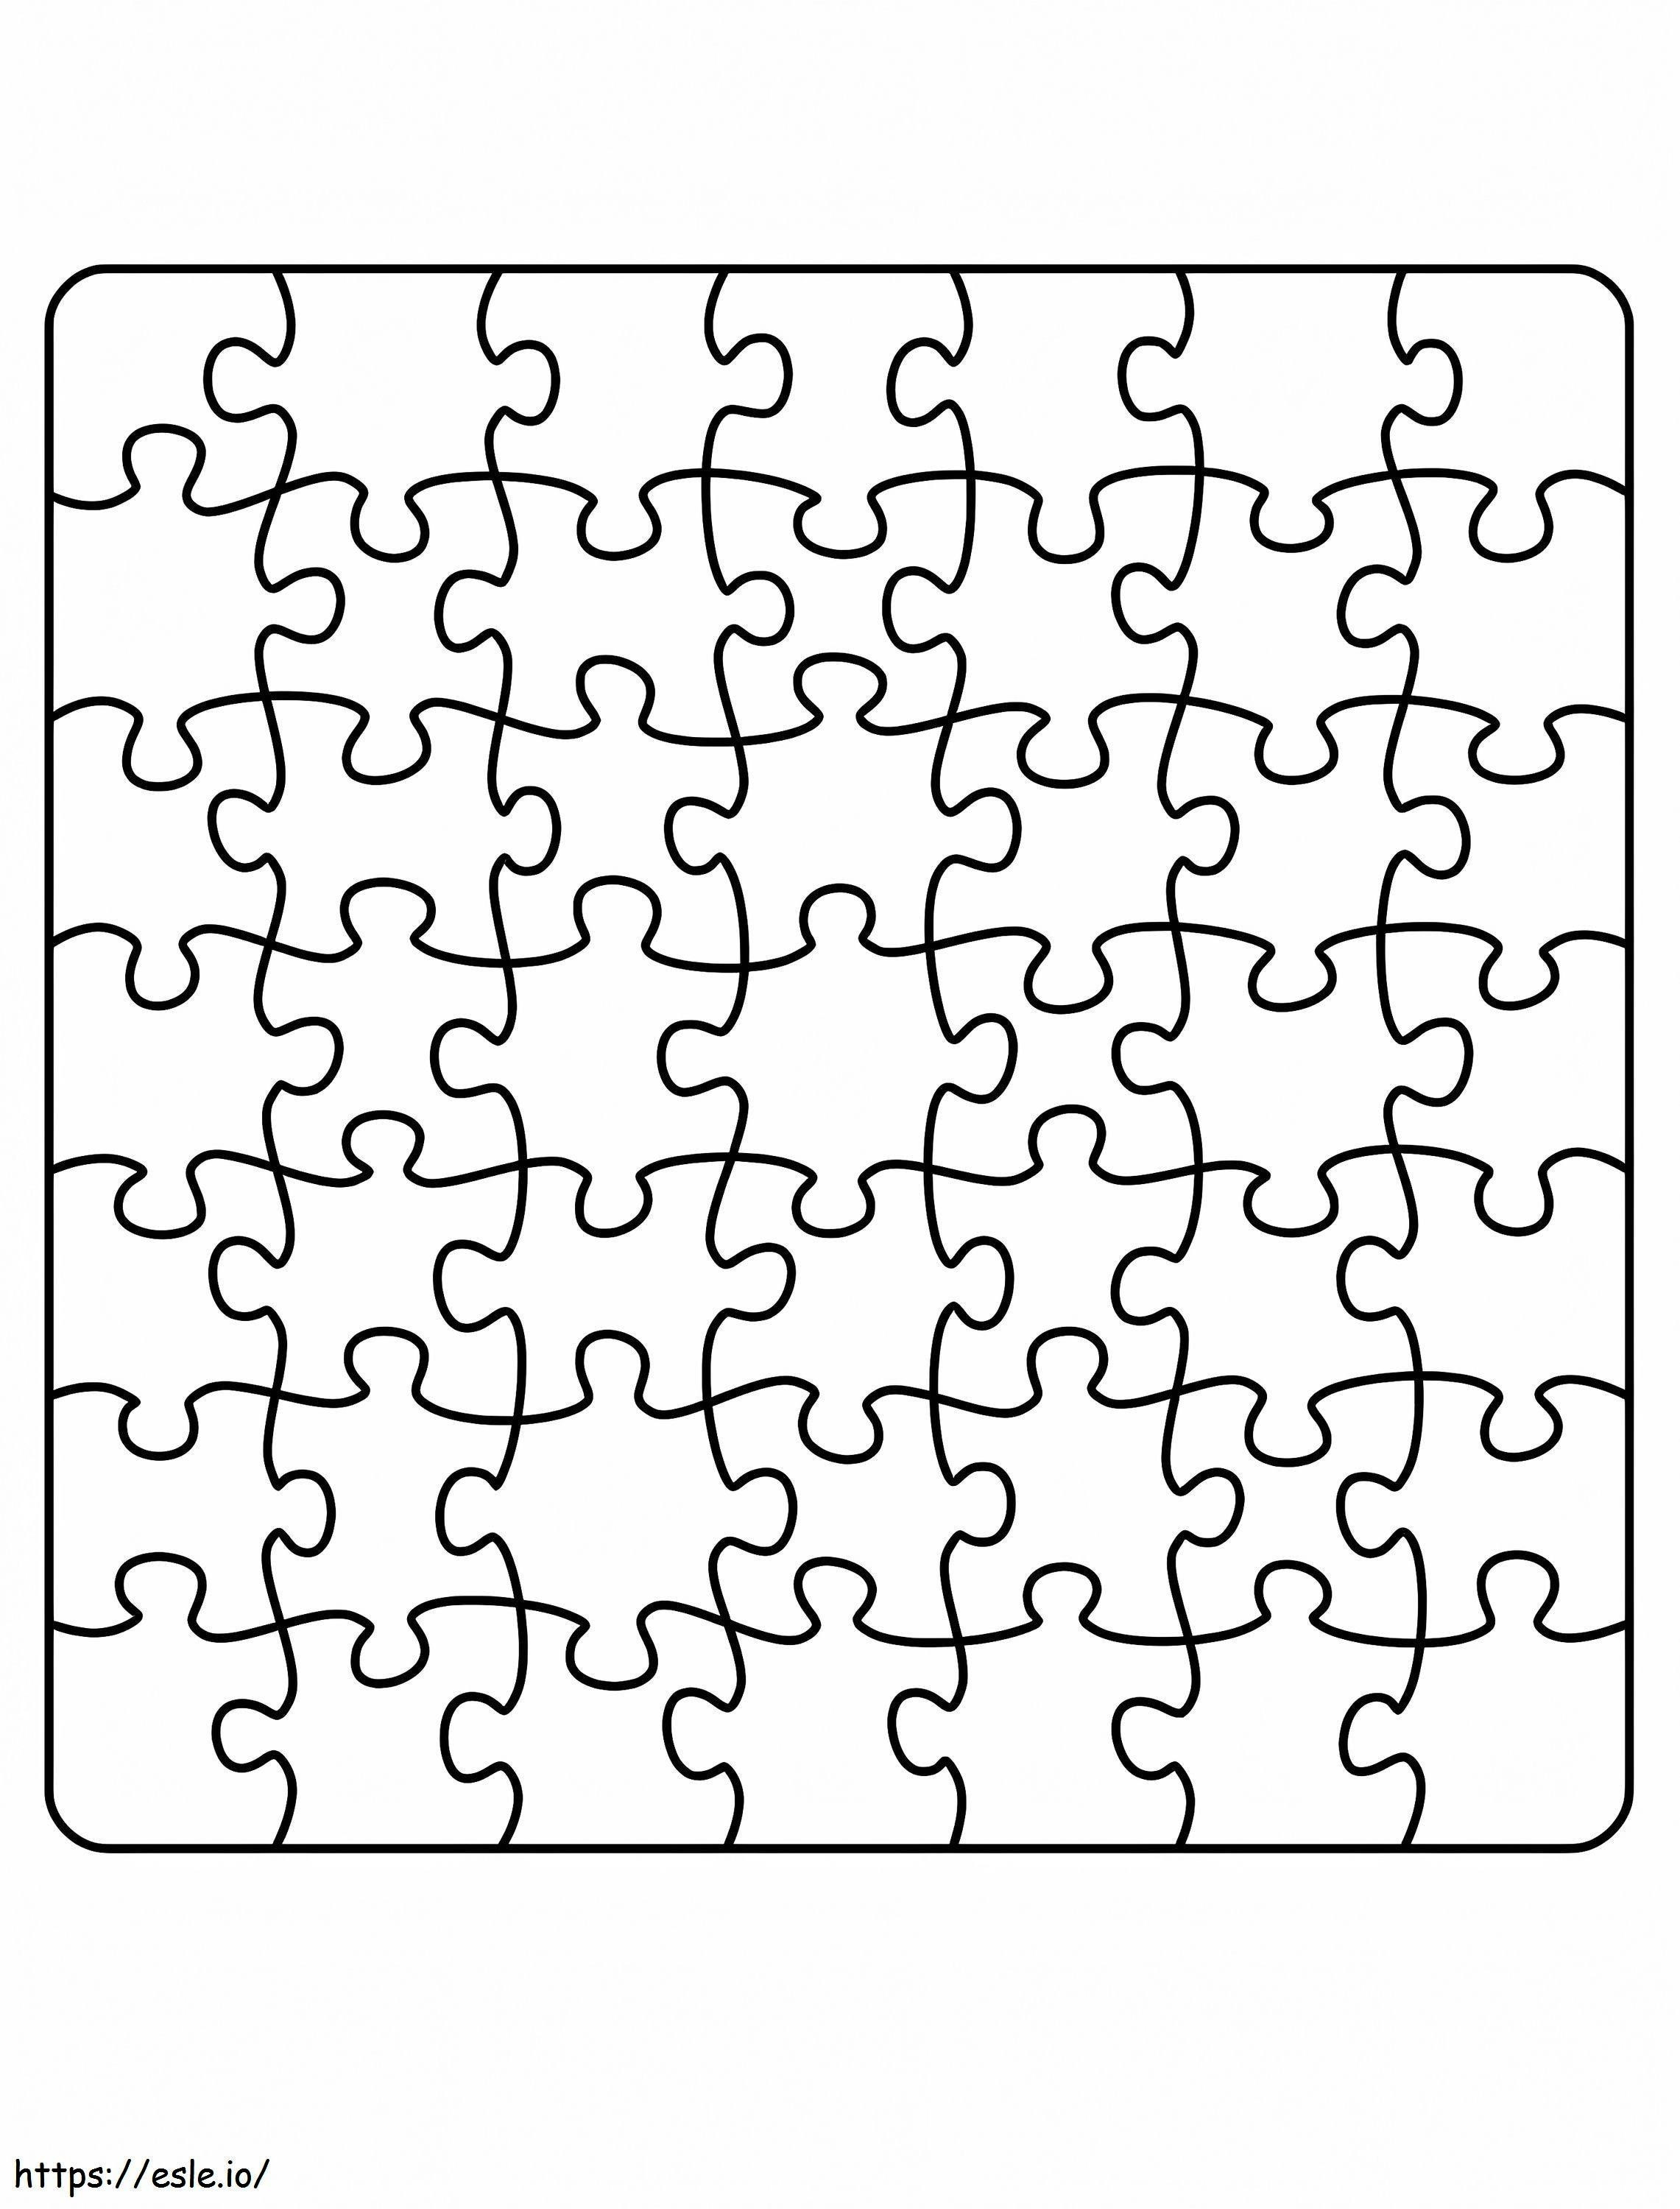 Free Printable Jigsaw Puzzle coloring page